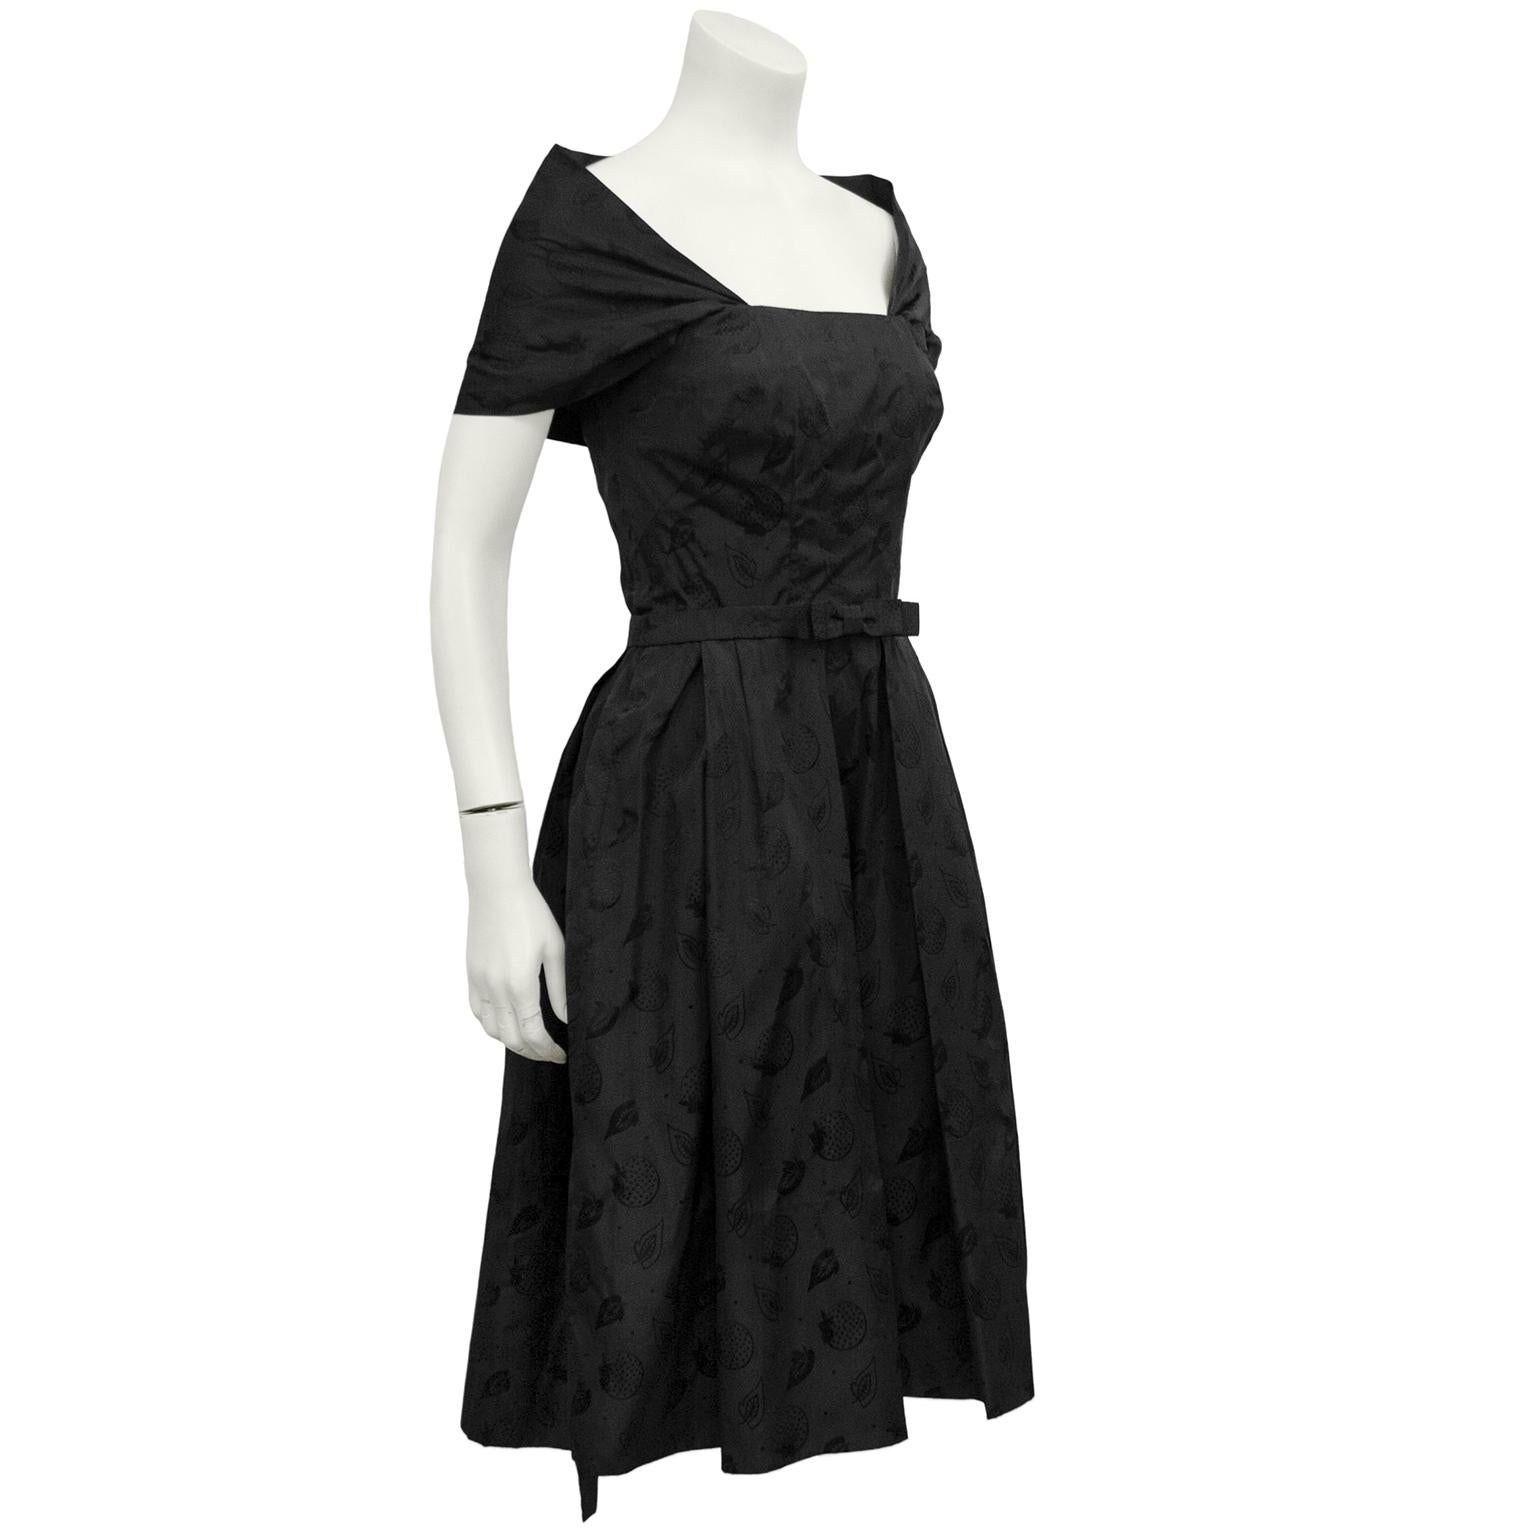 Stunning hard to find 1950s Mainbocher cocktail dress. Monochromatic black silk jacquard with an all over leaf and orange pattern. Stole style attached collar with fitted bodice, slim waist belt with flat bow detail and a full aline skirt with box